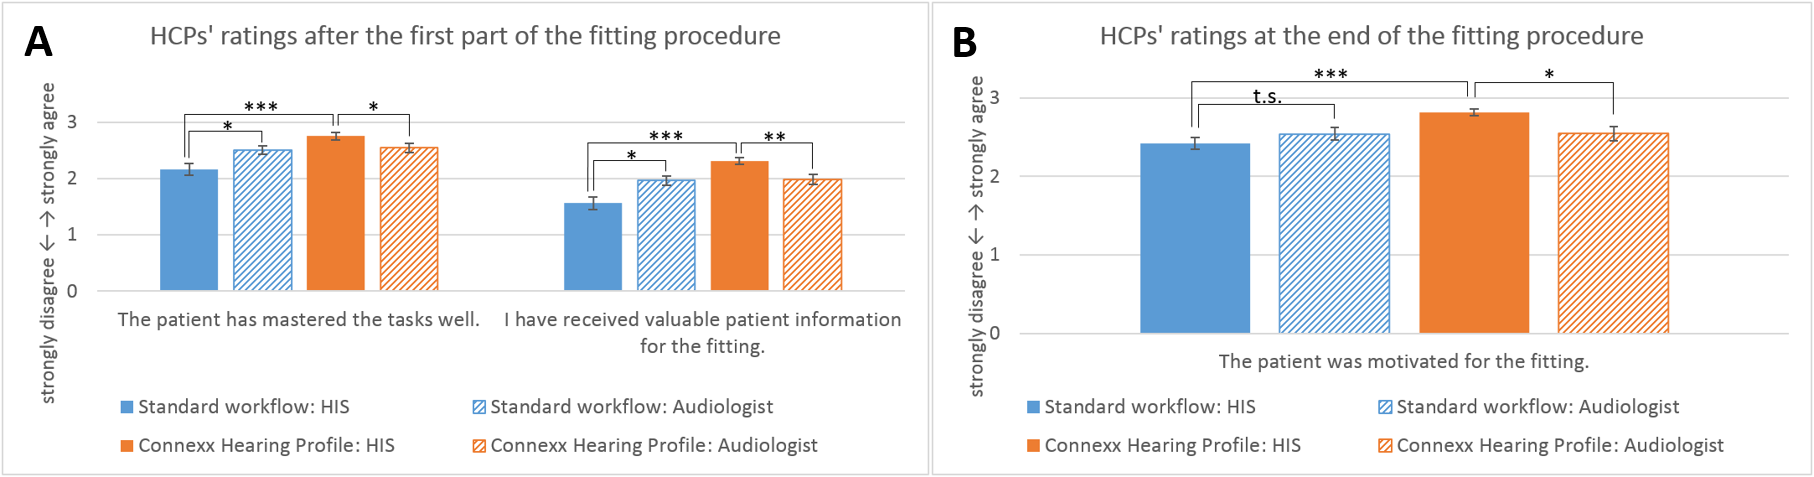 HCPs‘ ratings of the standard workflow and the Connexx Hearing Profile depending on the HCP’s professional degree